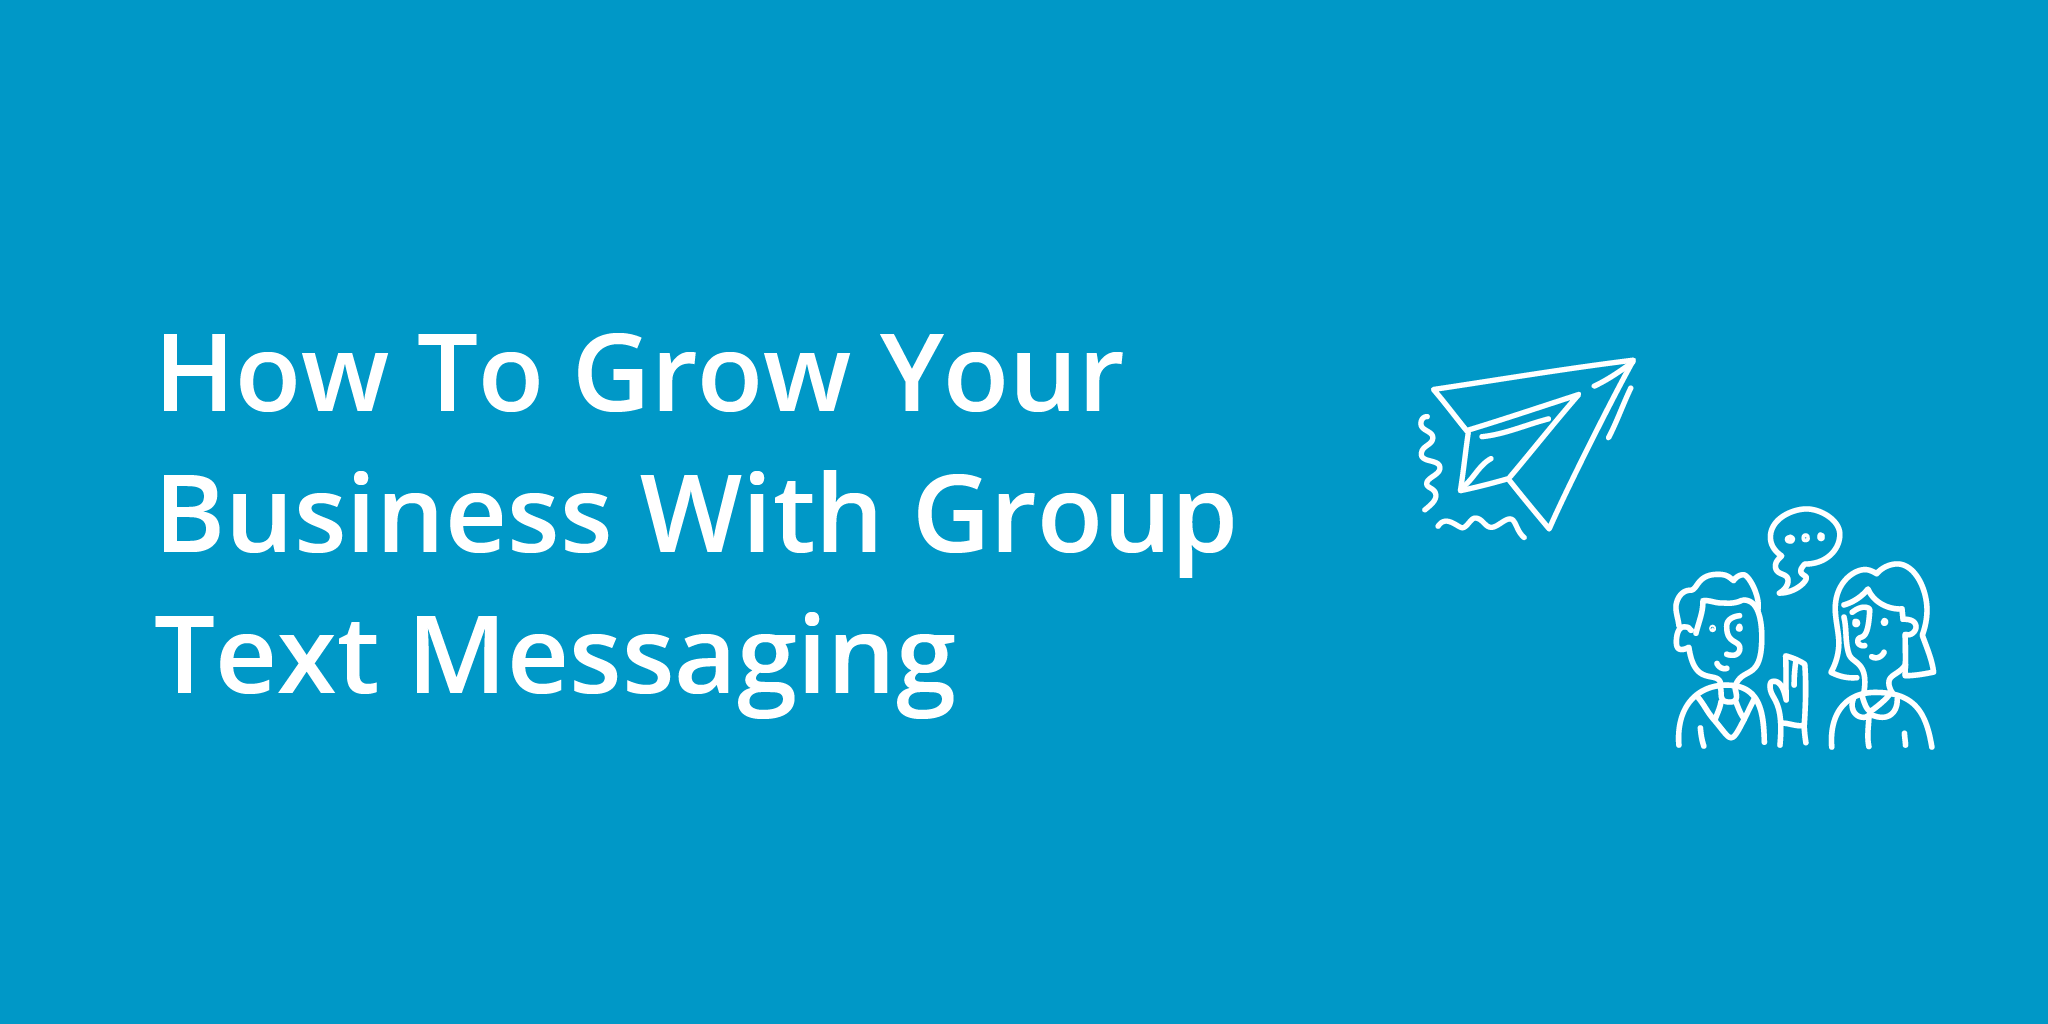 How To Grow Your Business With Group Text Messaging | Telephones for business